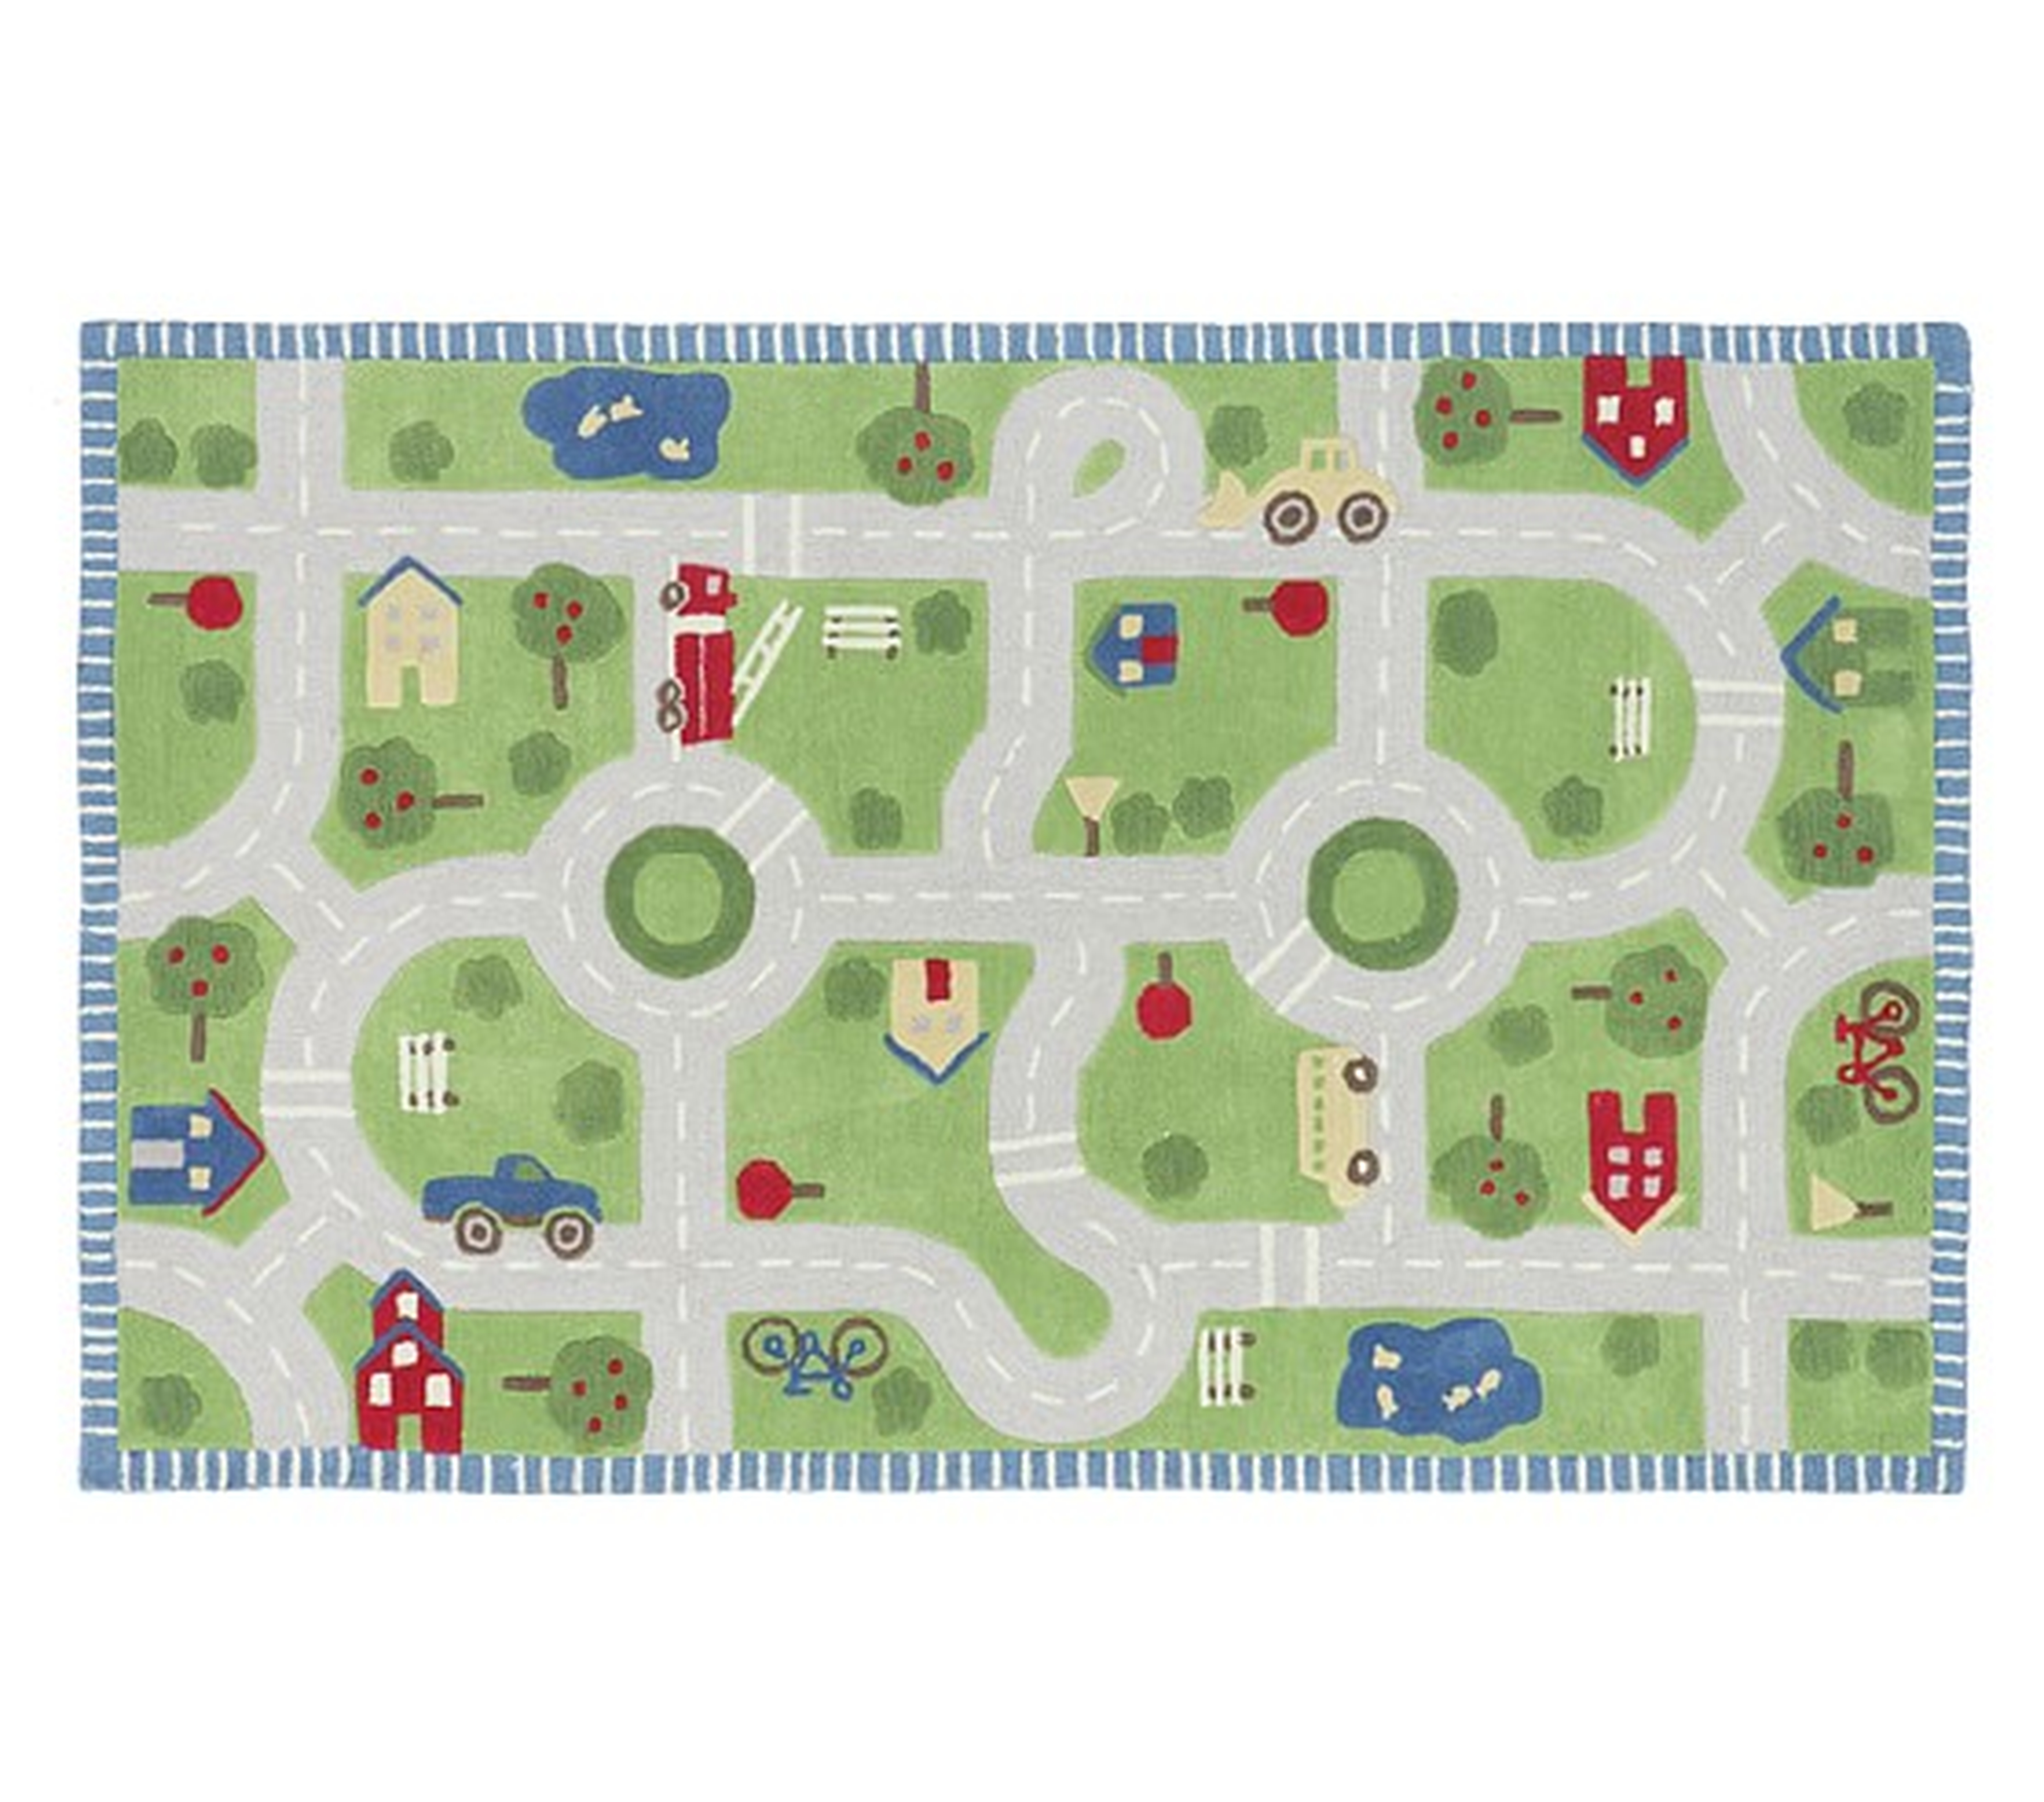 3D Activity Play in the Park Rug, 5x8' - Pottery Barn Kids